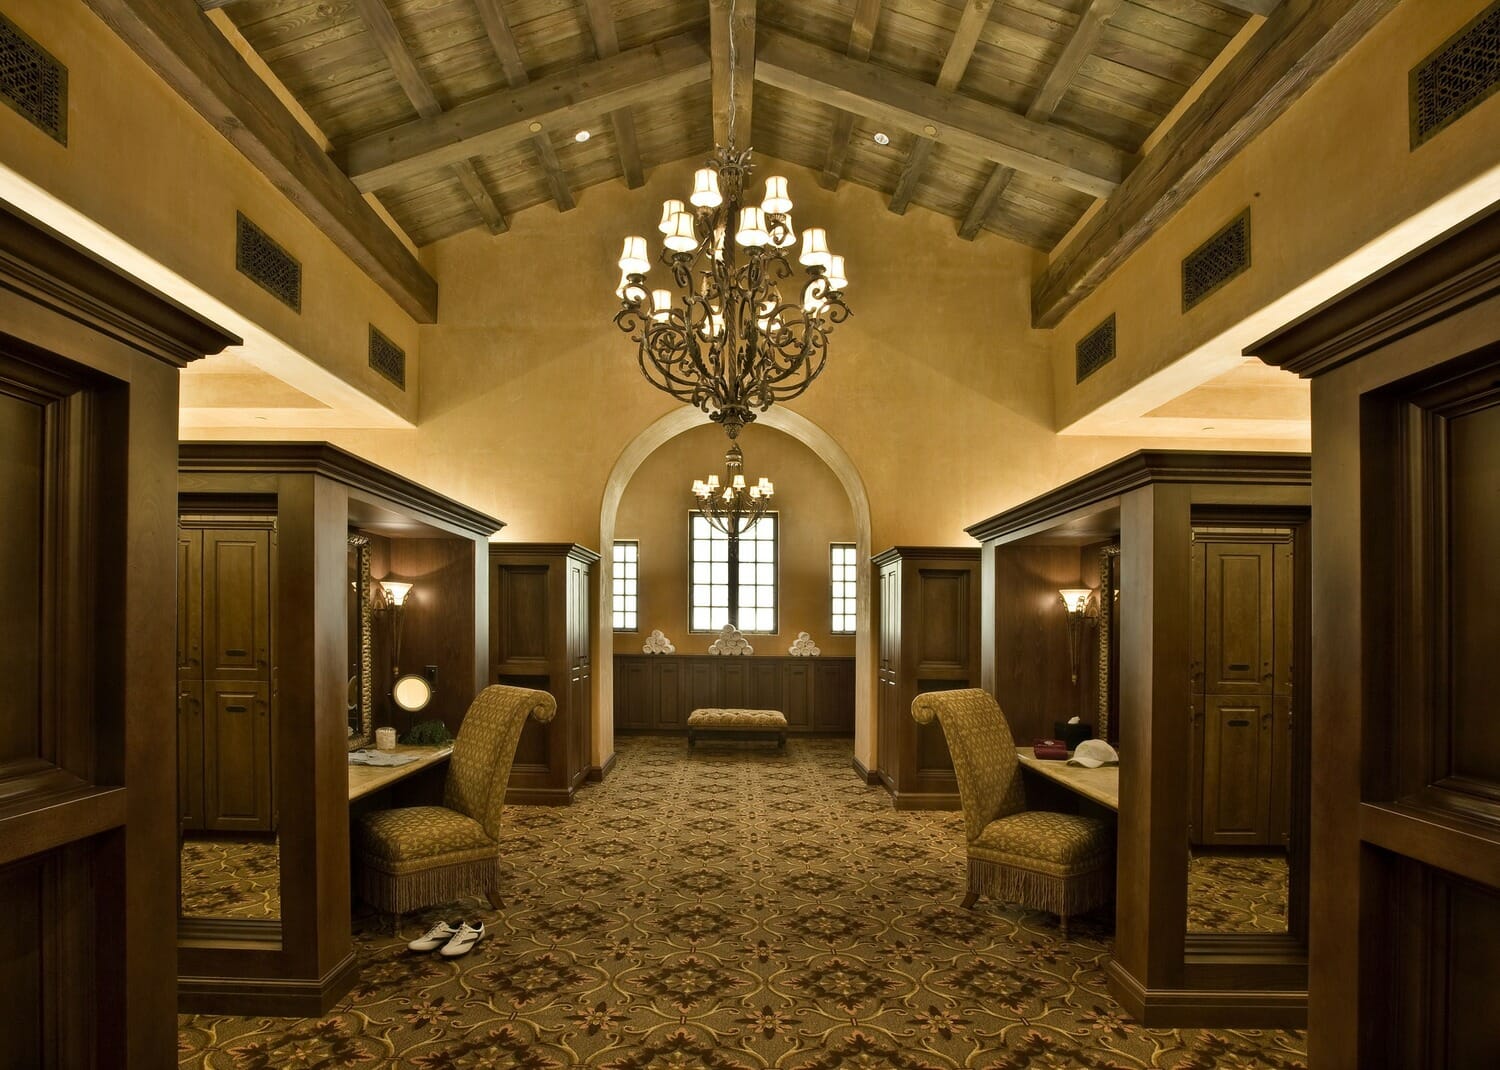 A hallway with a chandelier and chairs.